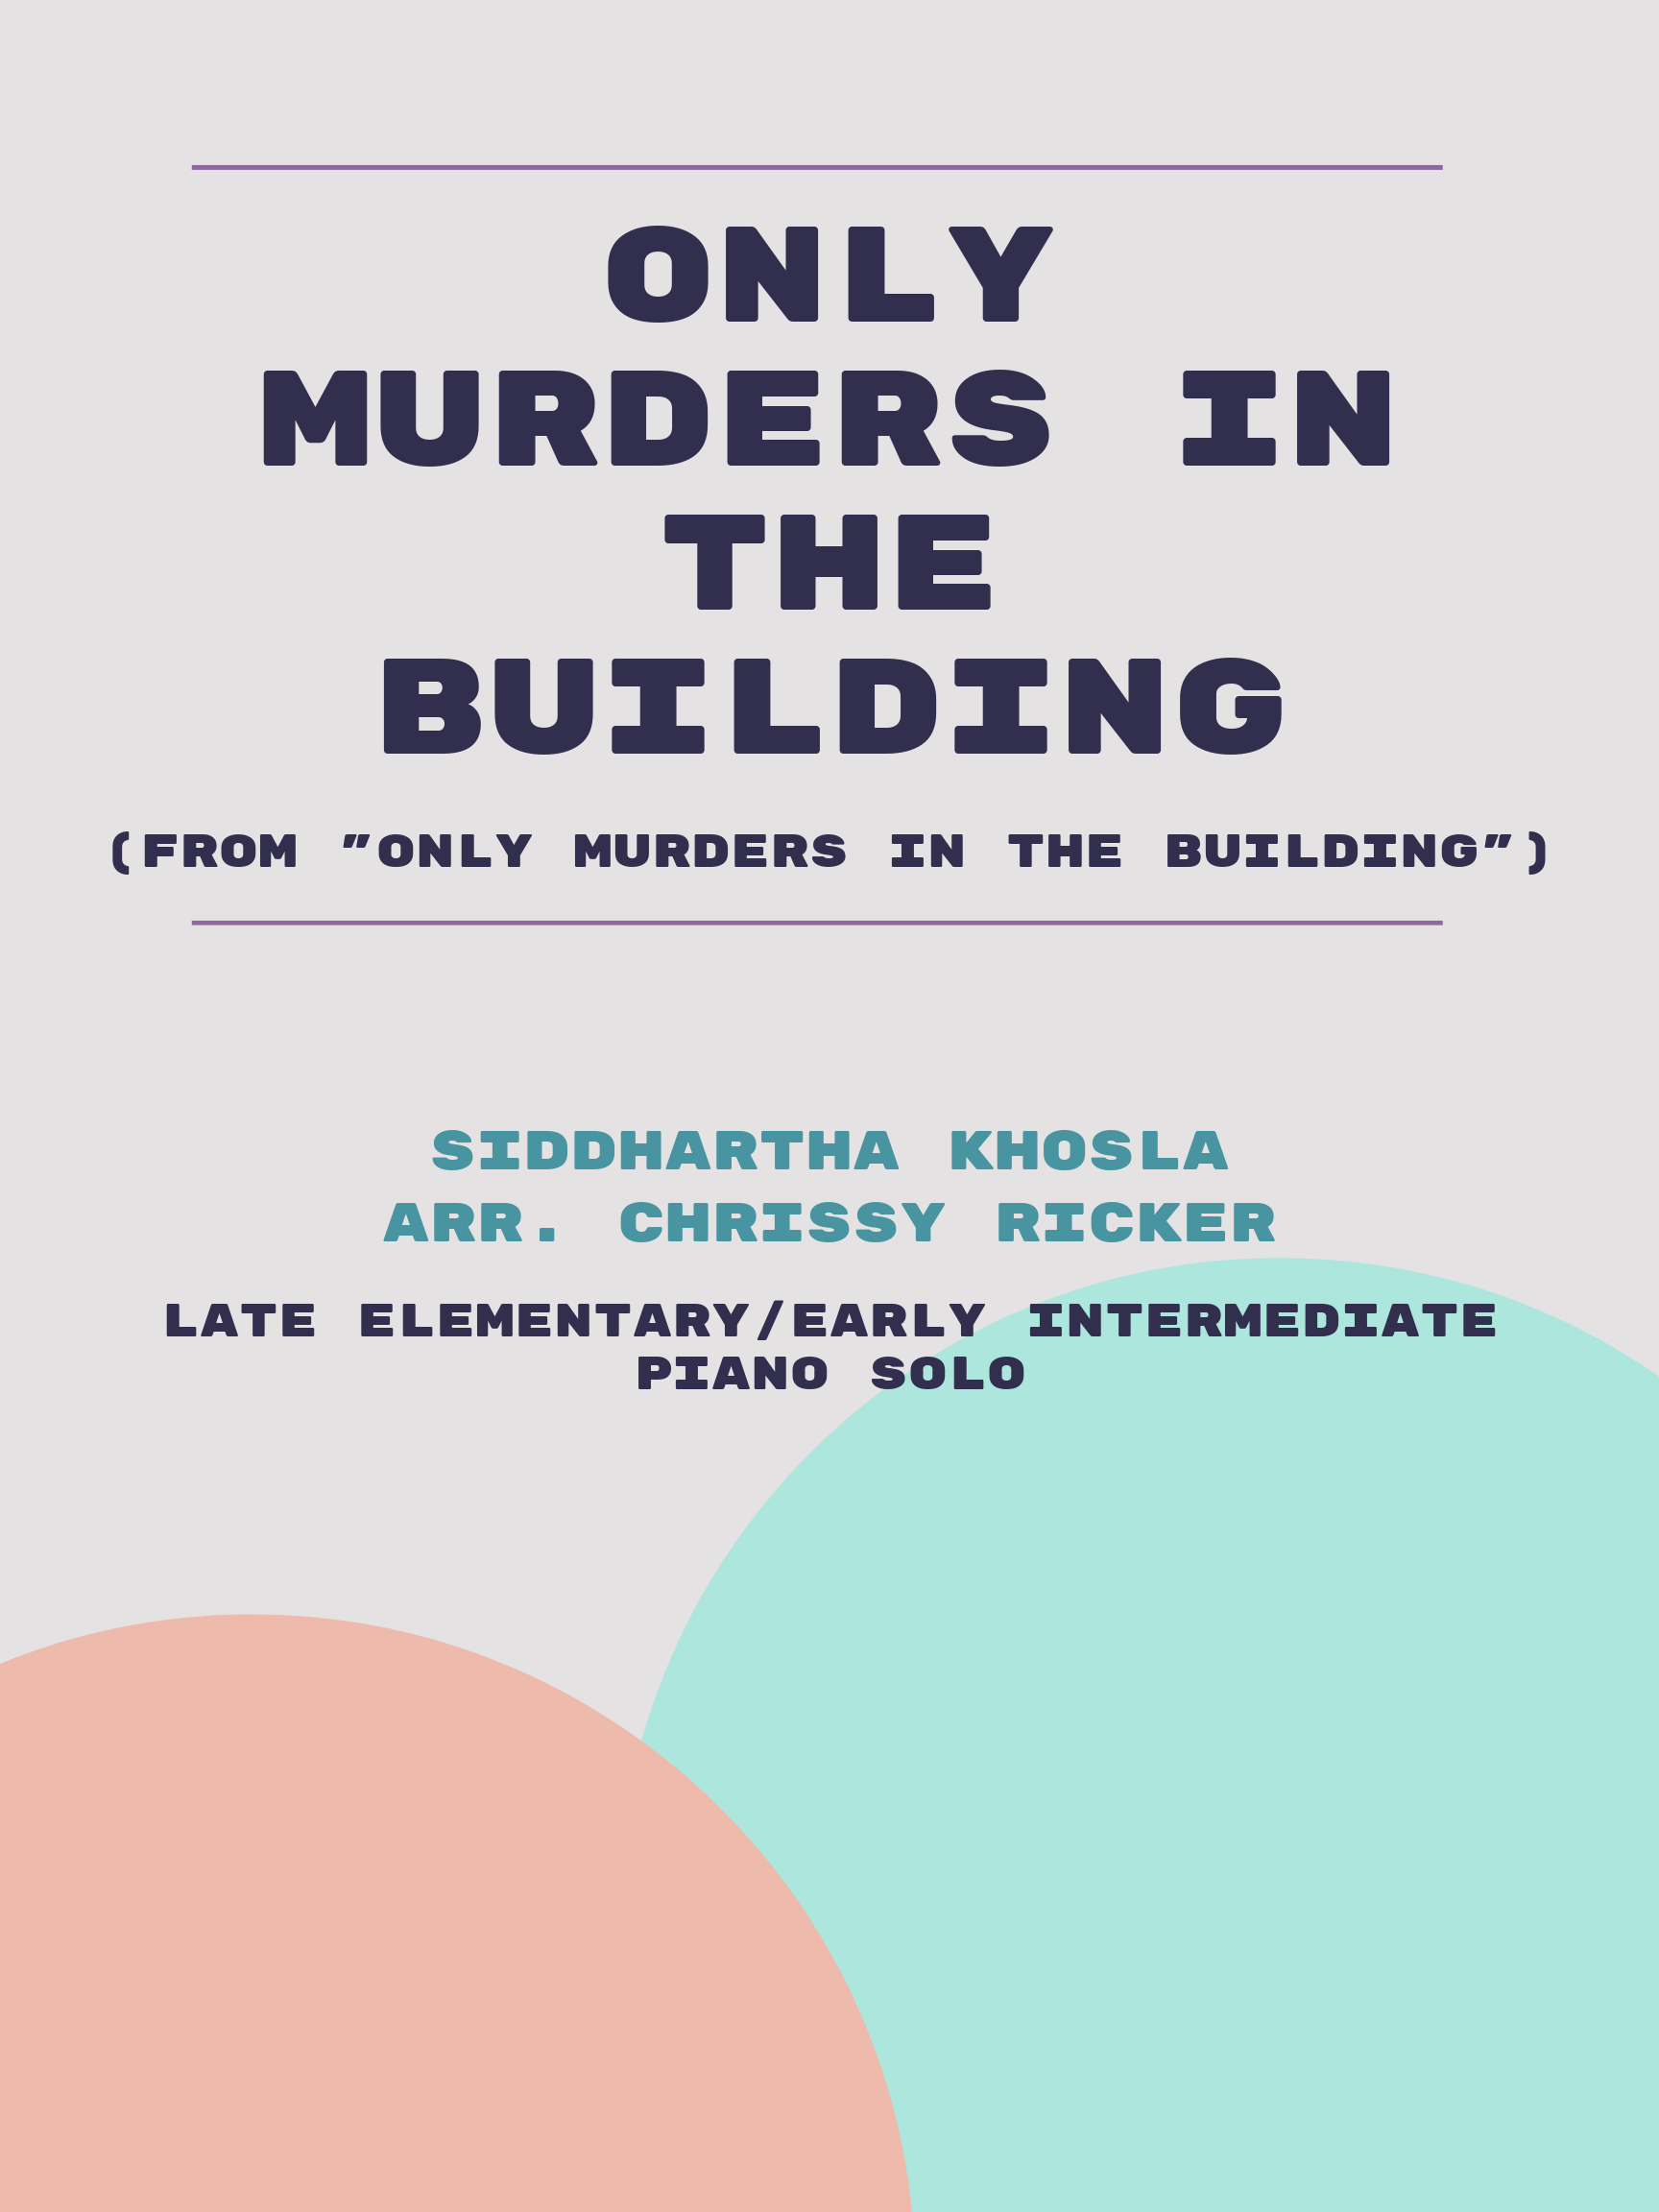 Only Murders in the Building by Siddhartha Khosla